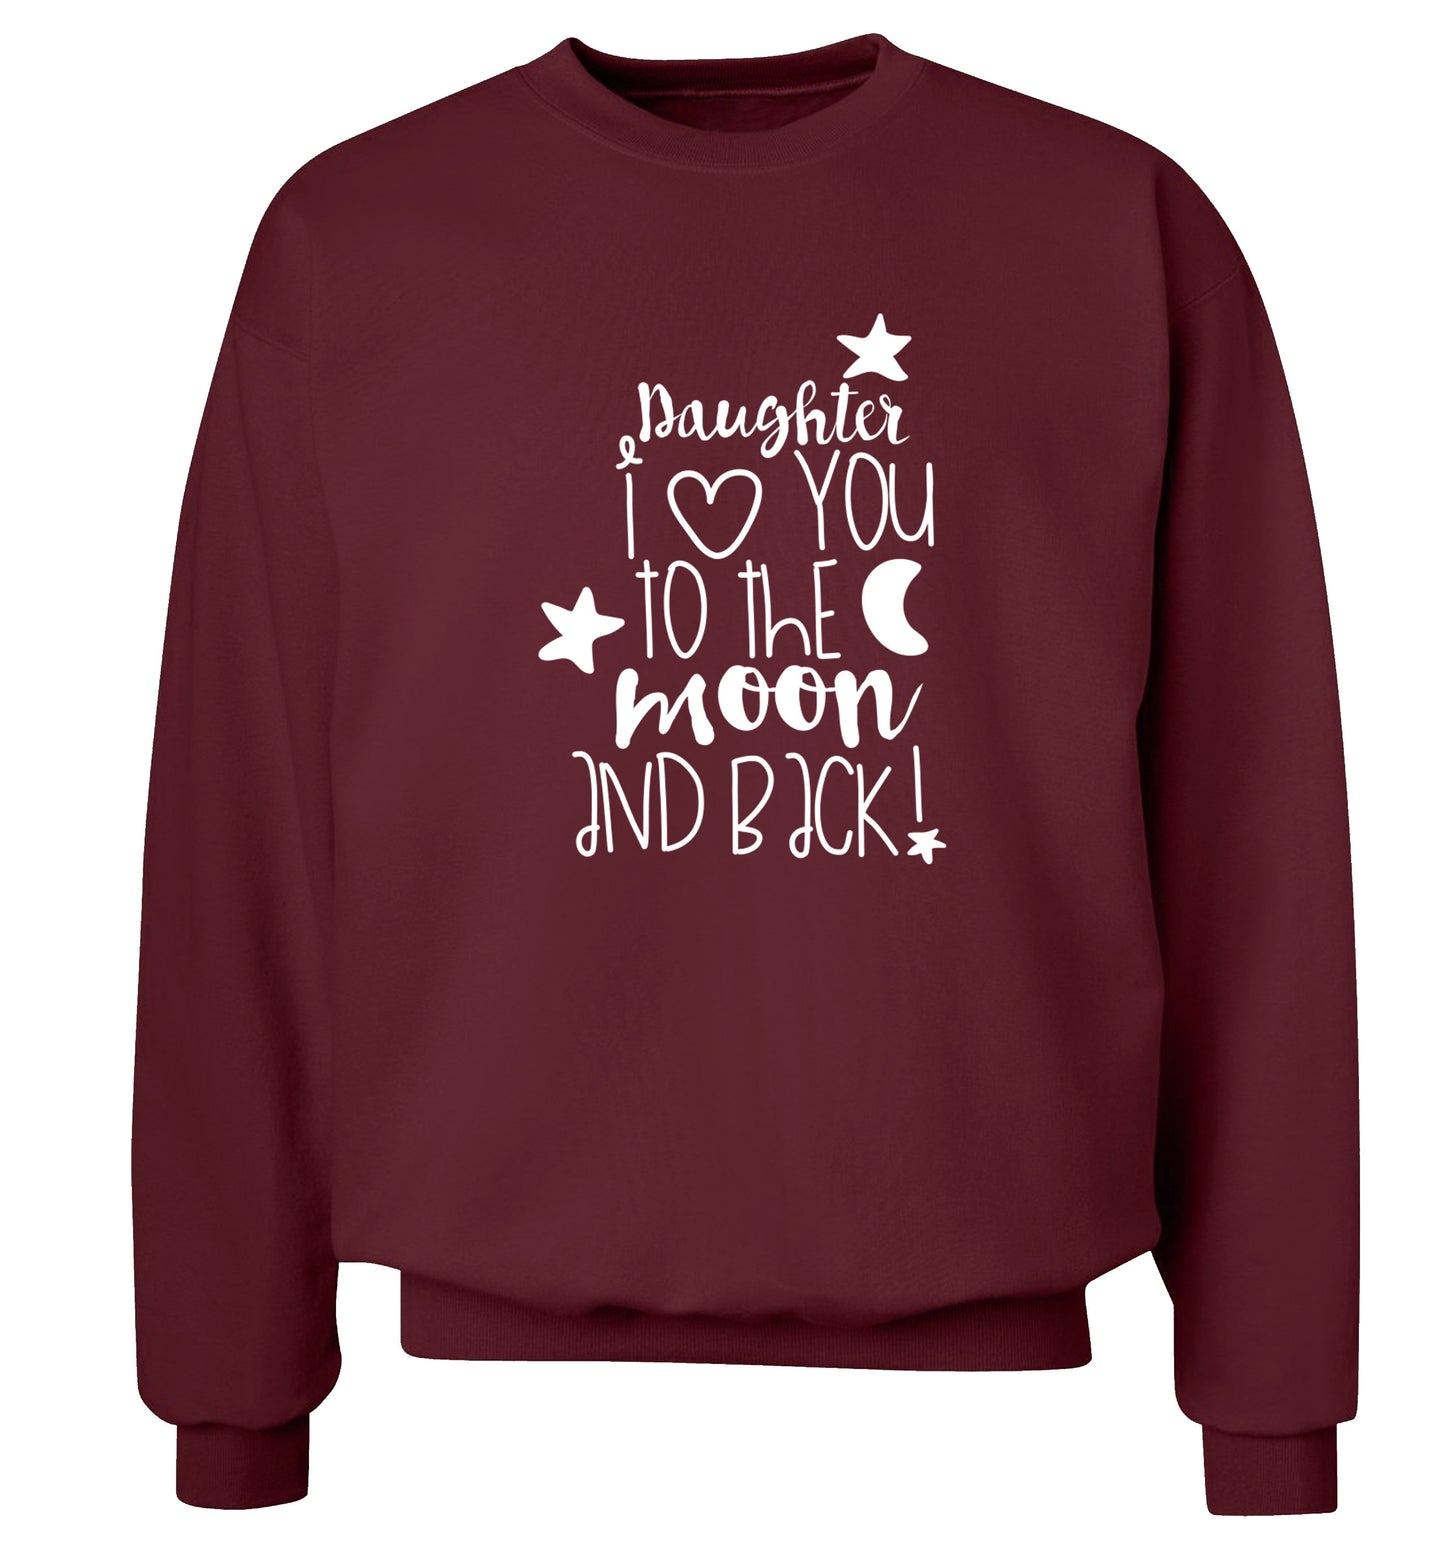 Daughter I love you to the moon and back Adult's unisex maroon  sweater 2XL